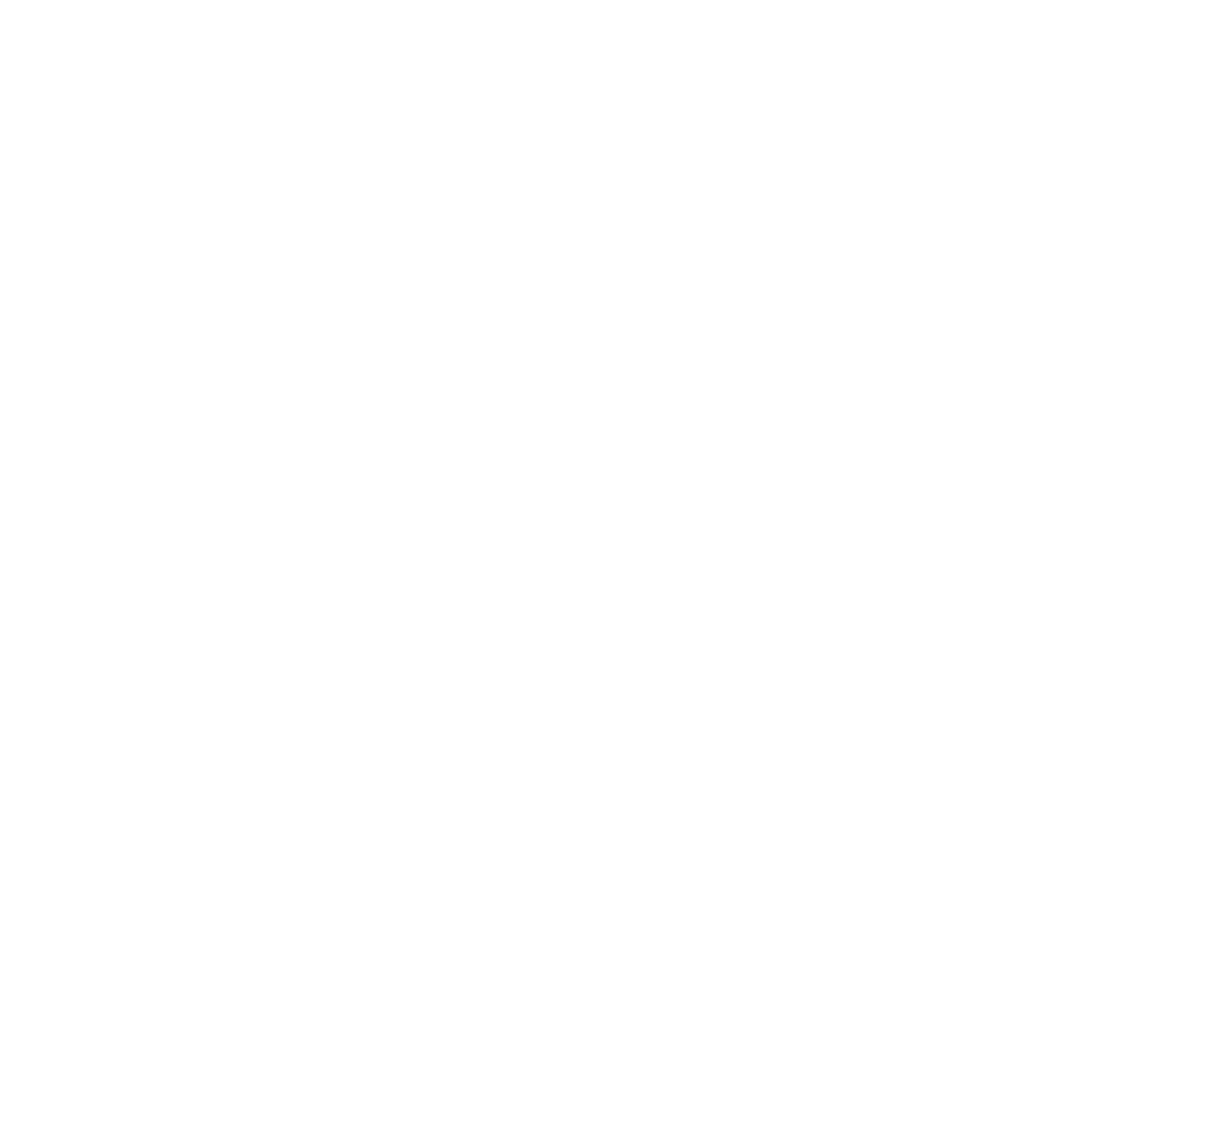 Towing Service in Kingston Upon Thames